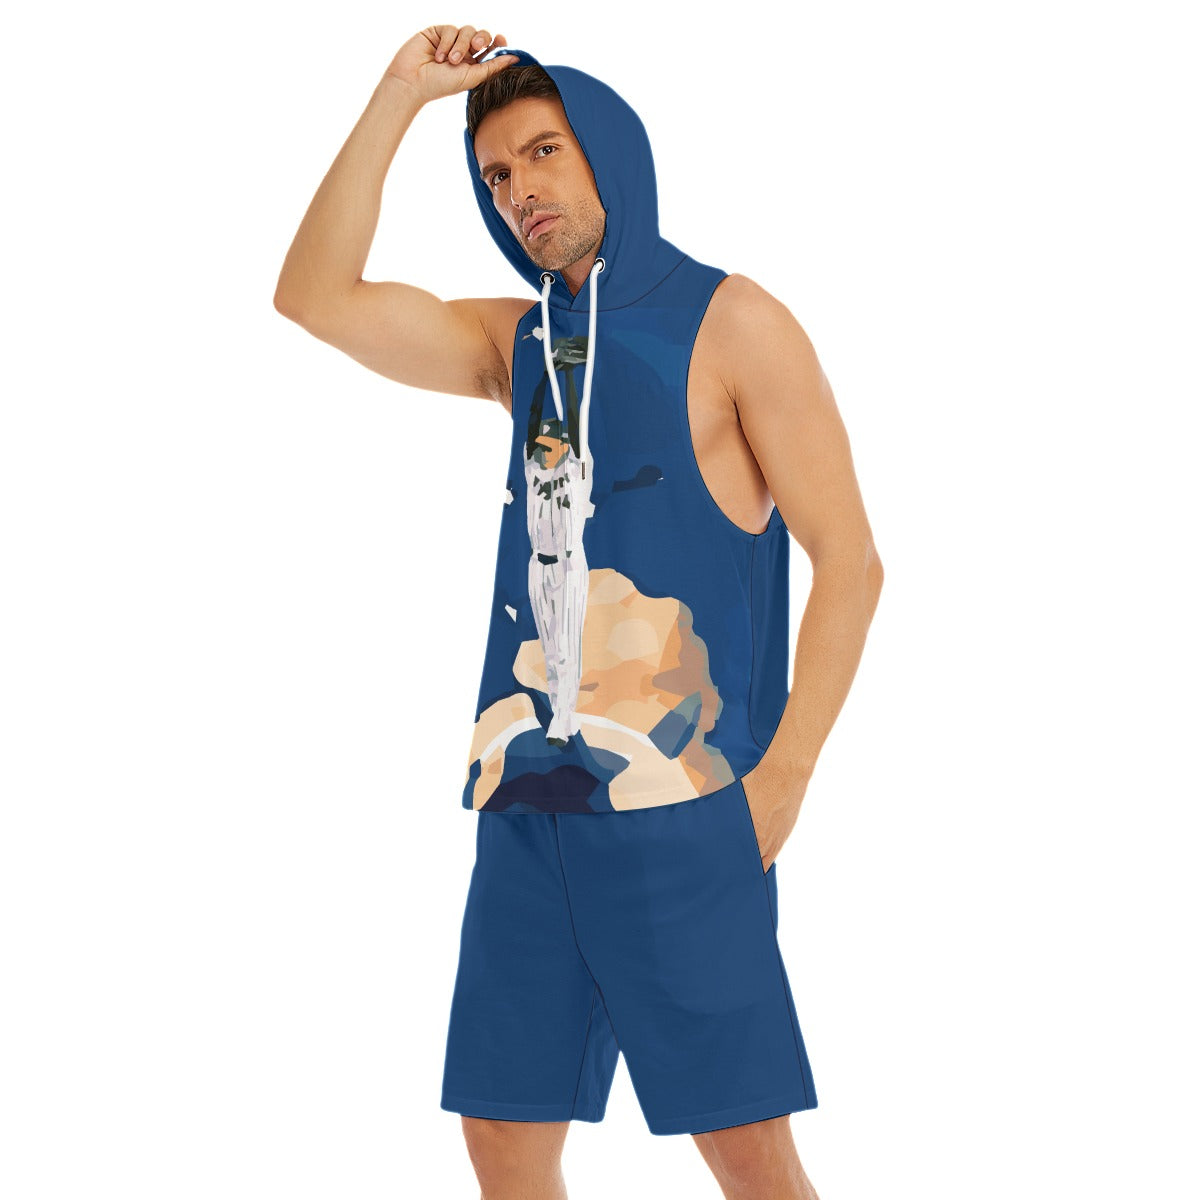 Pitching On top of the World Sleeveless semi stringer hoodie tank And Shorts Sets